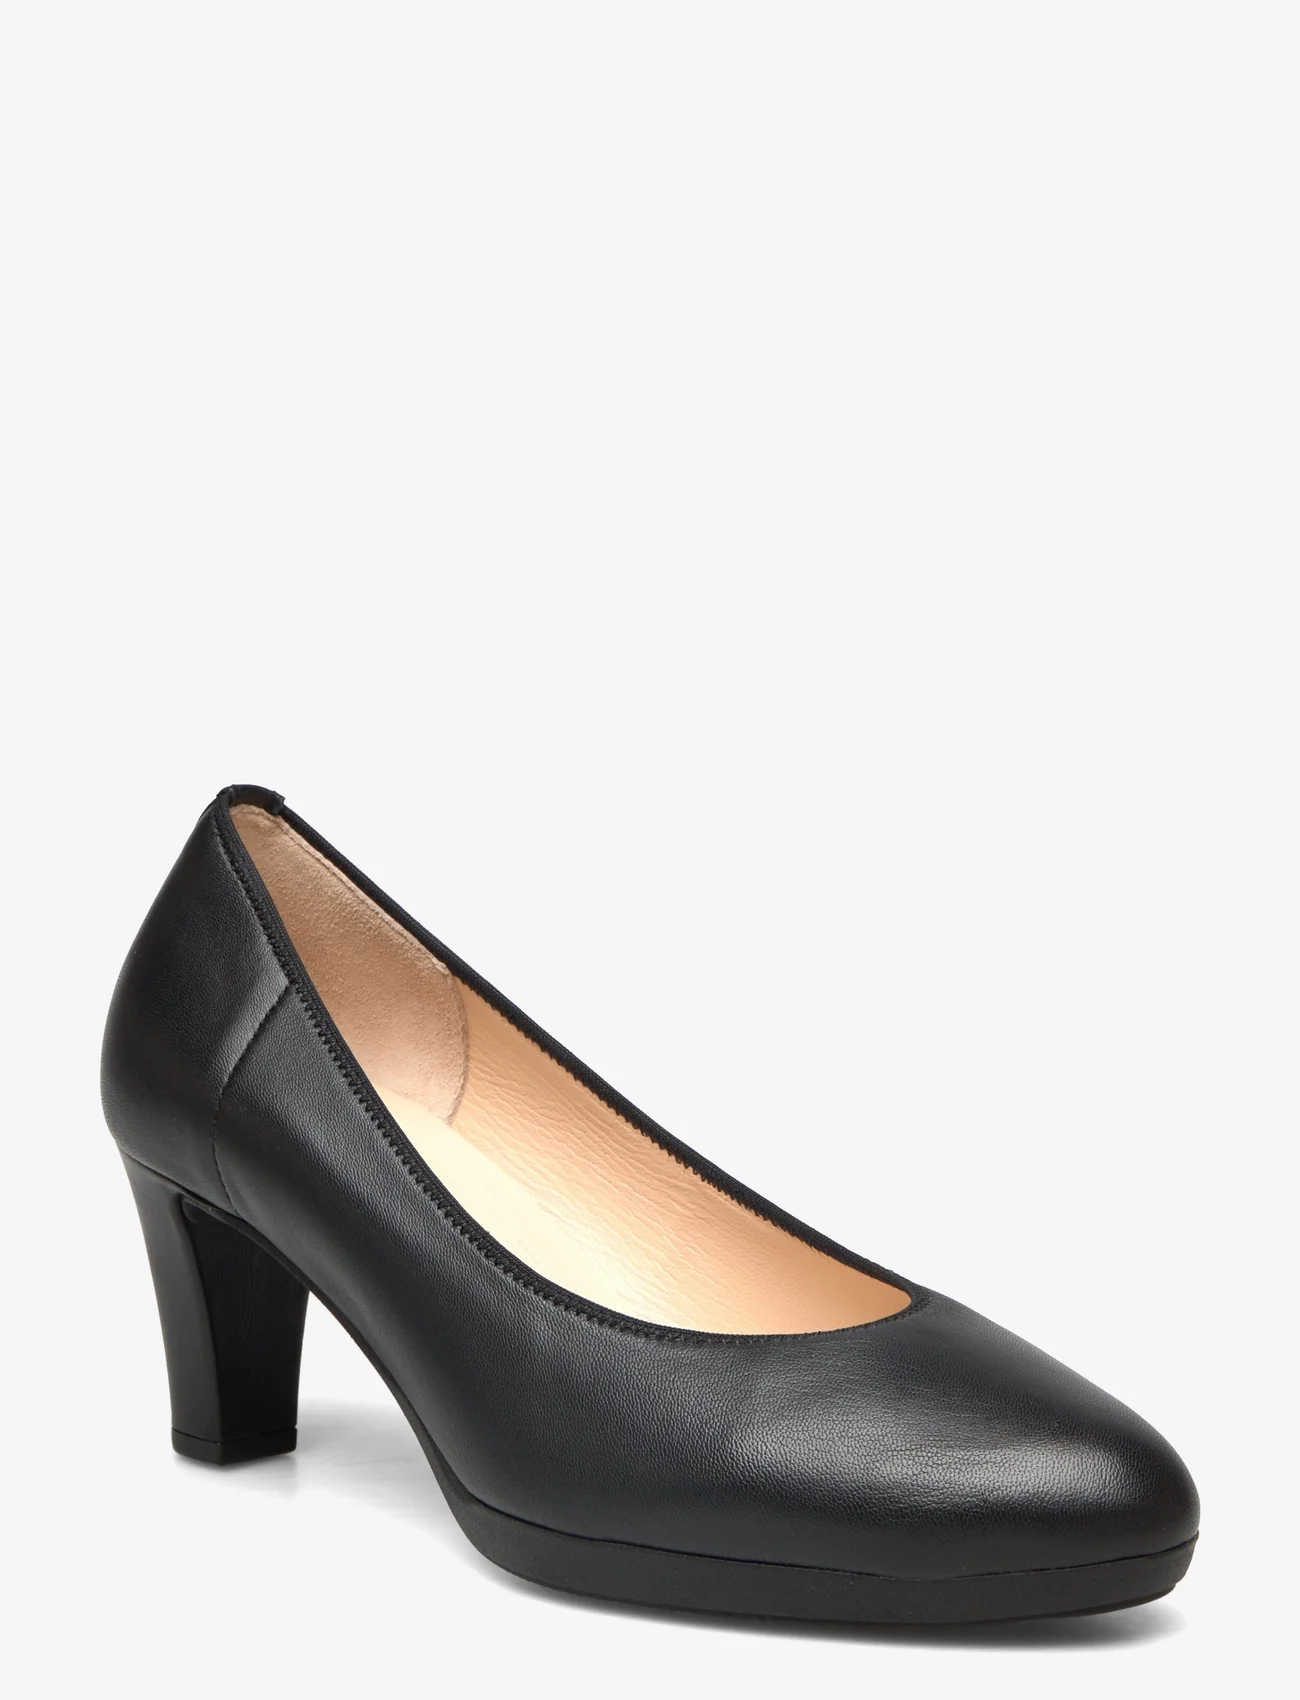 Gabor - Pumps - party wear at outlet prices - black - 0